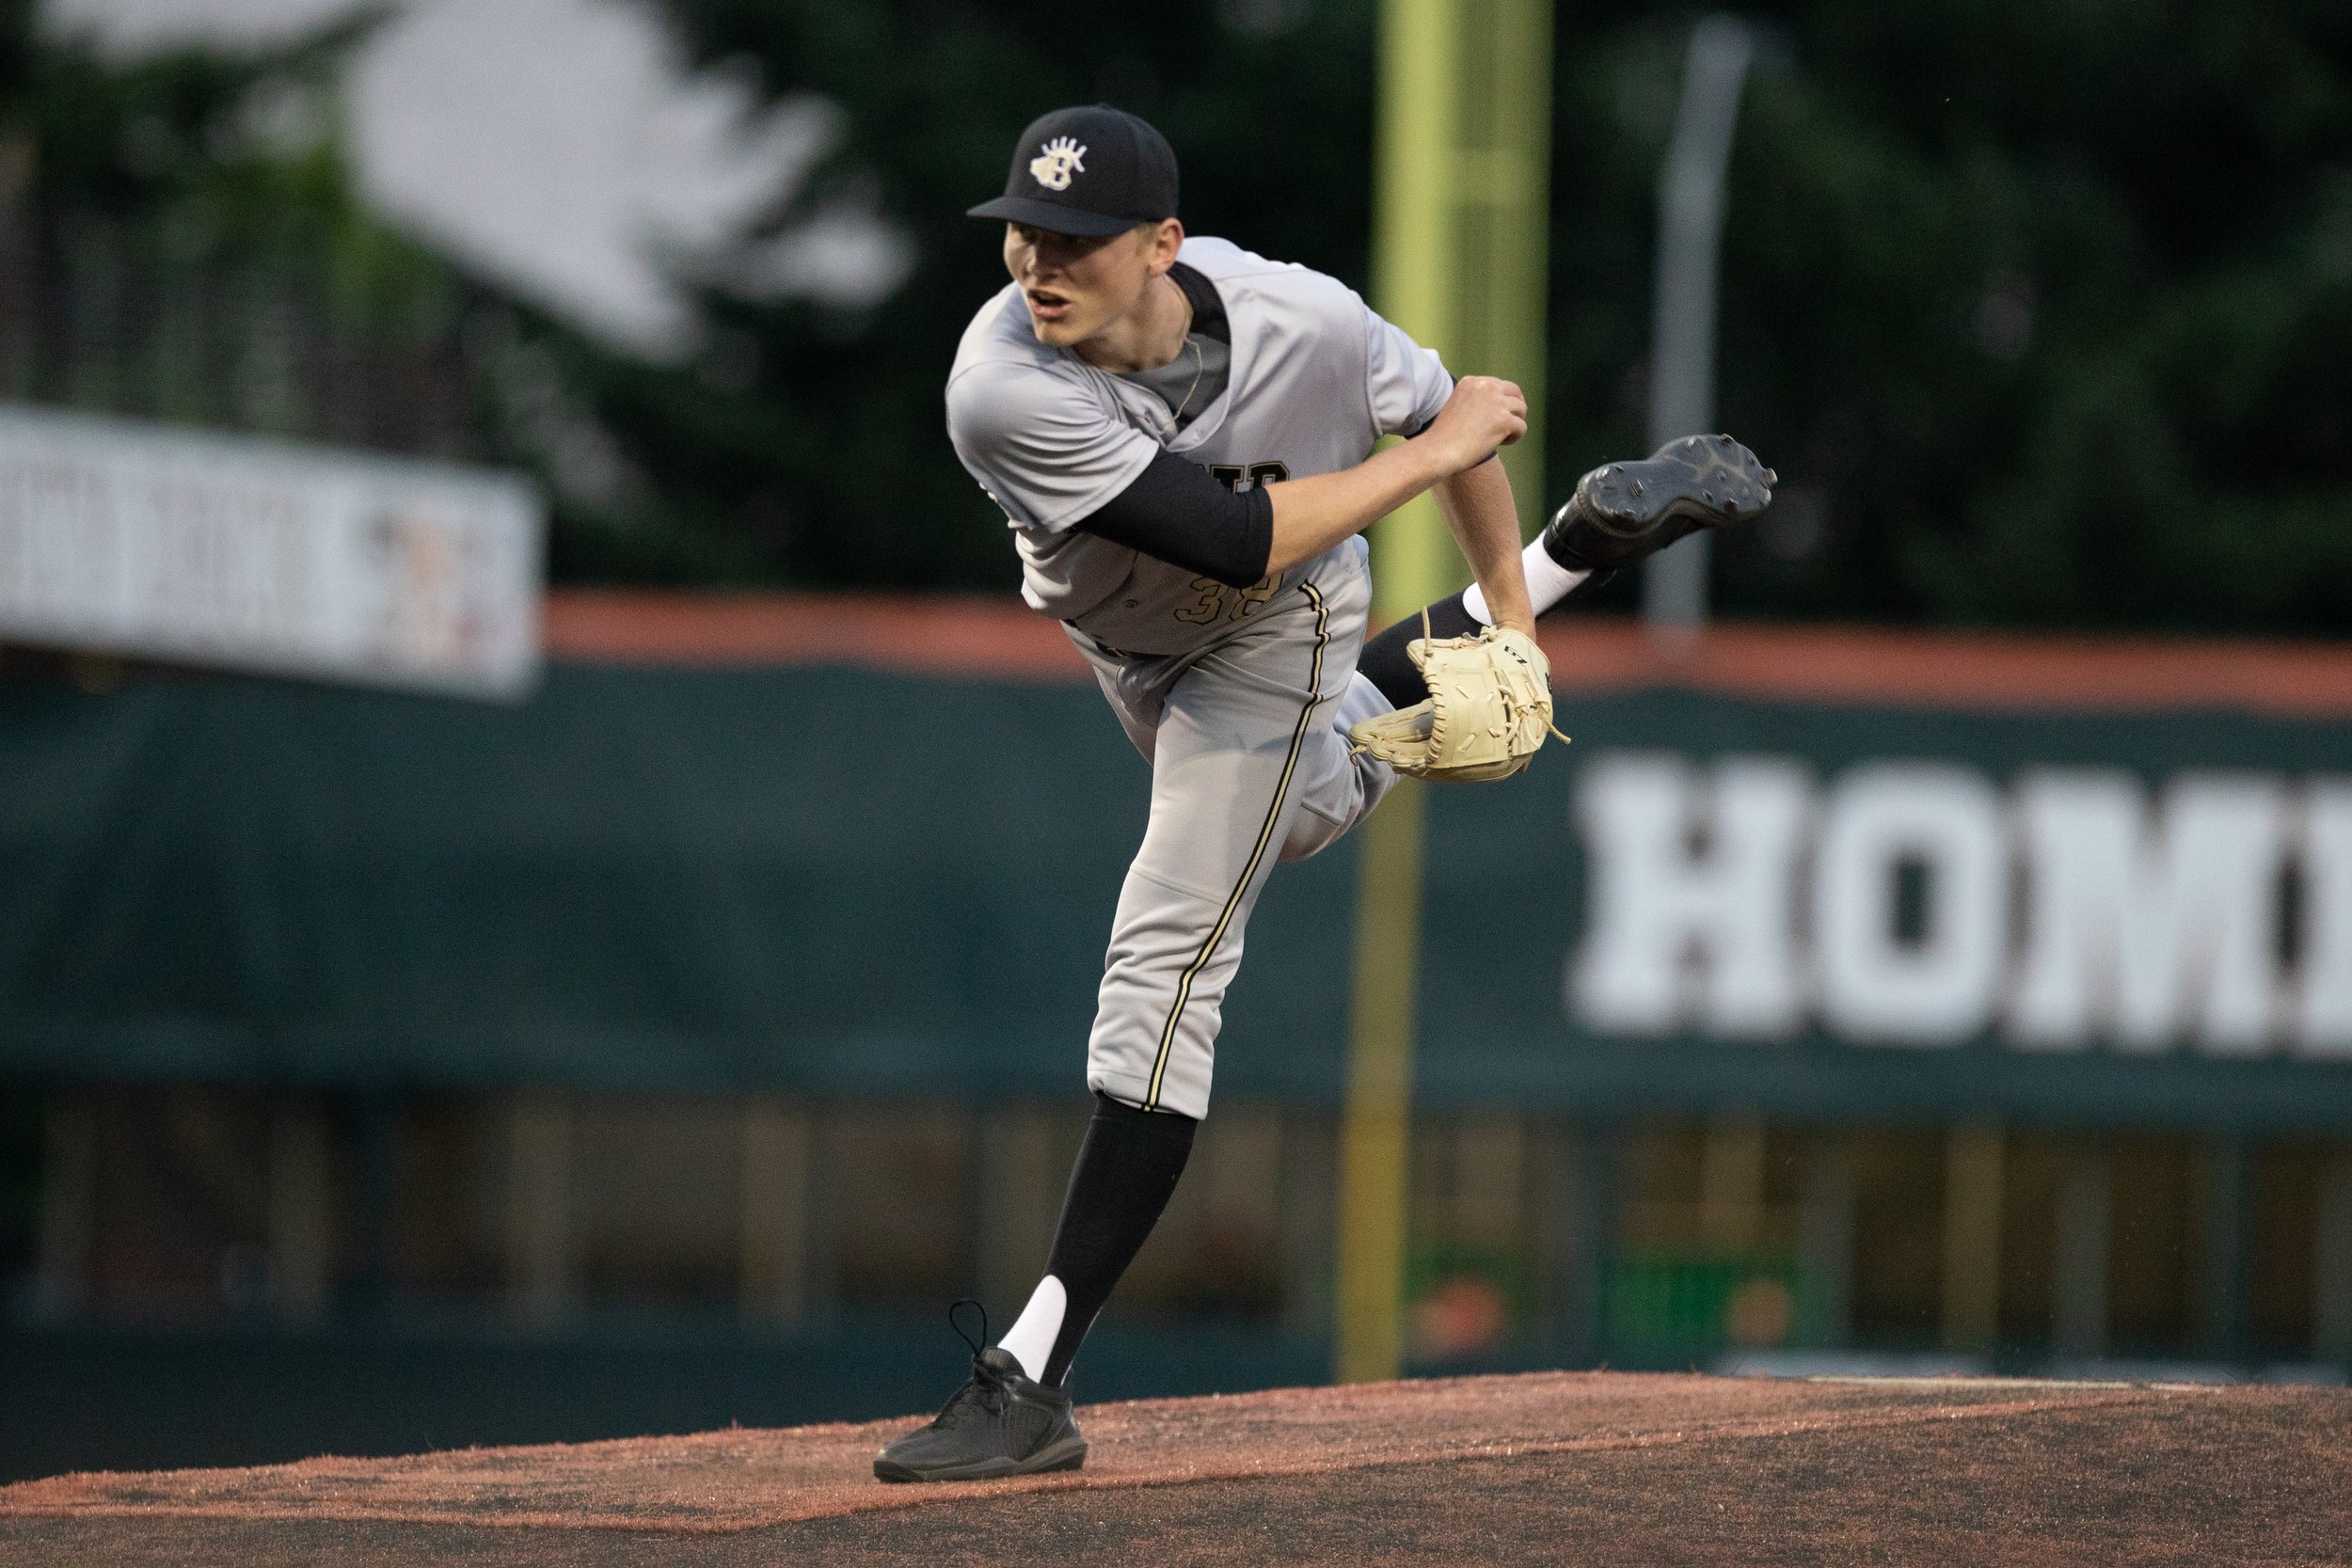 Elks Pitchers Cut Up Pickles to Earn First Win of Second Half — Bend Elks Baseball Club